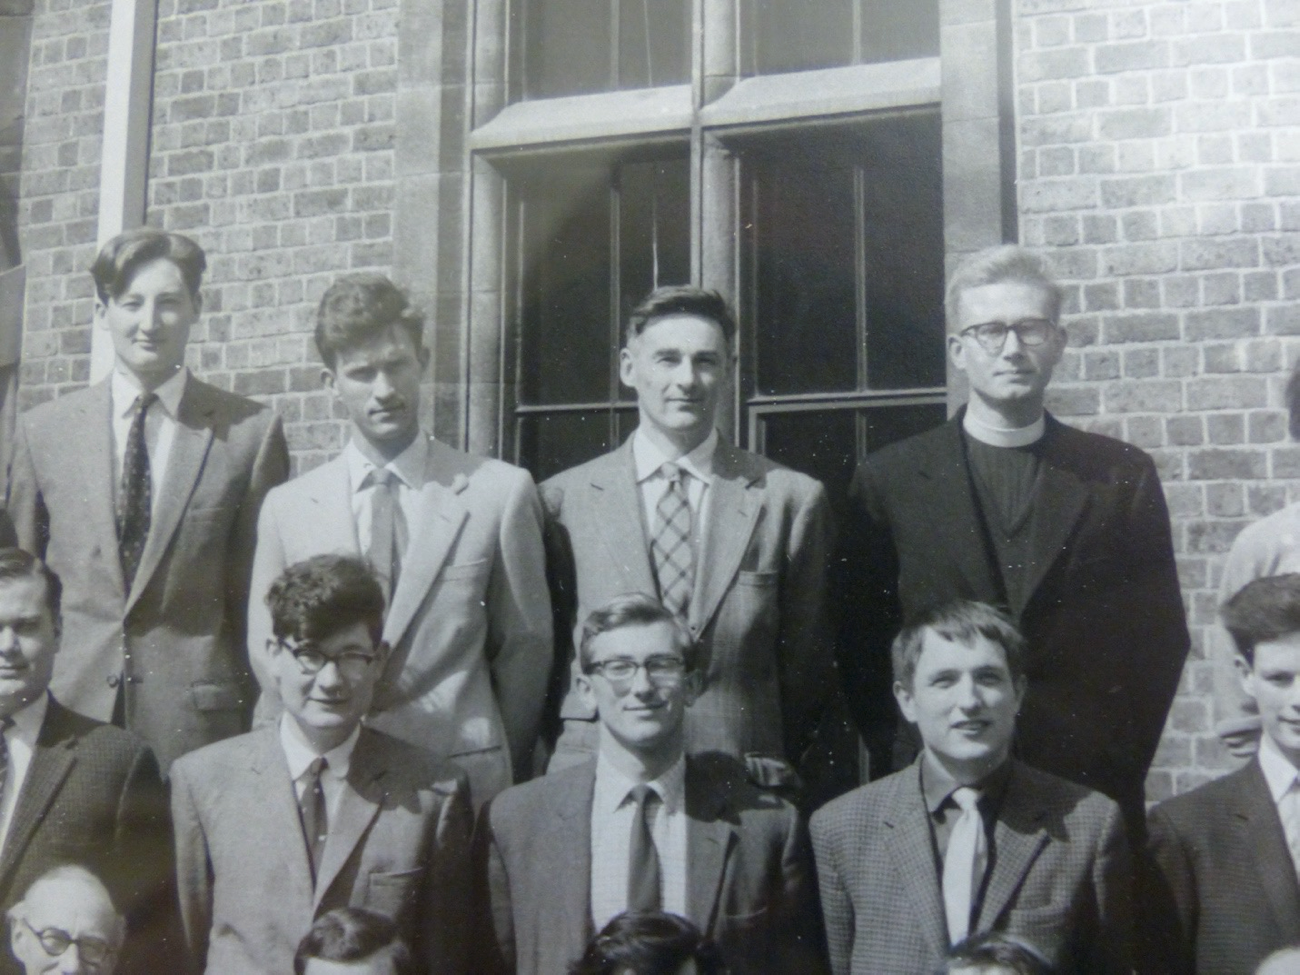 Part of a Sedgwick club photograph featuring Michael Bown